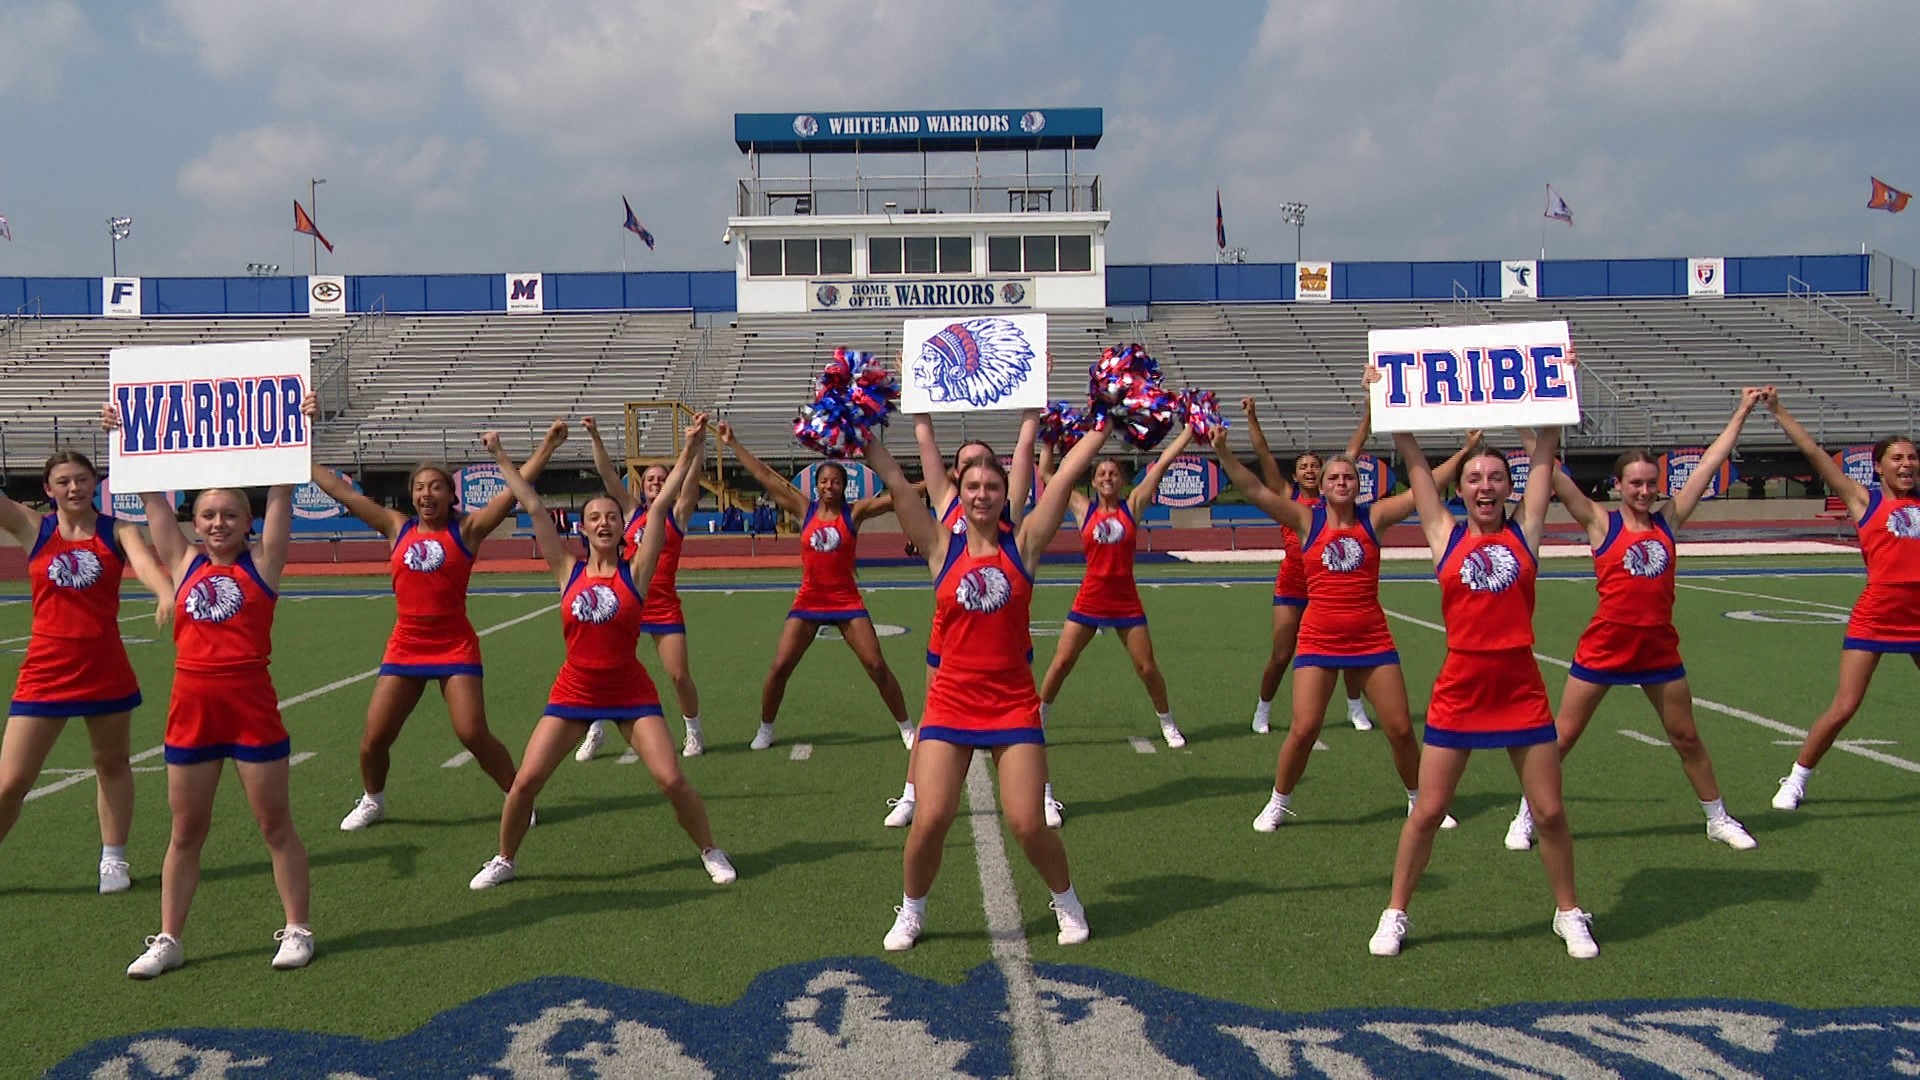 Watch the Whiteland High School cheerleaders perform as part of the Operation Football Game of the Week.